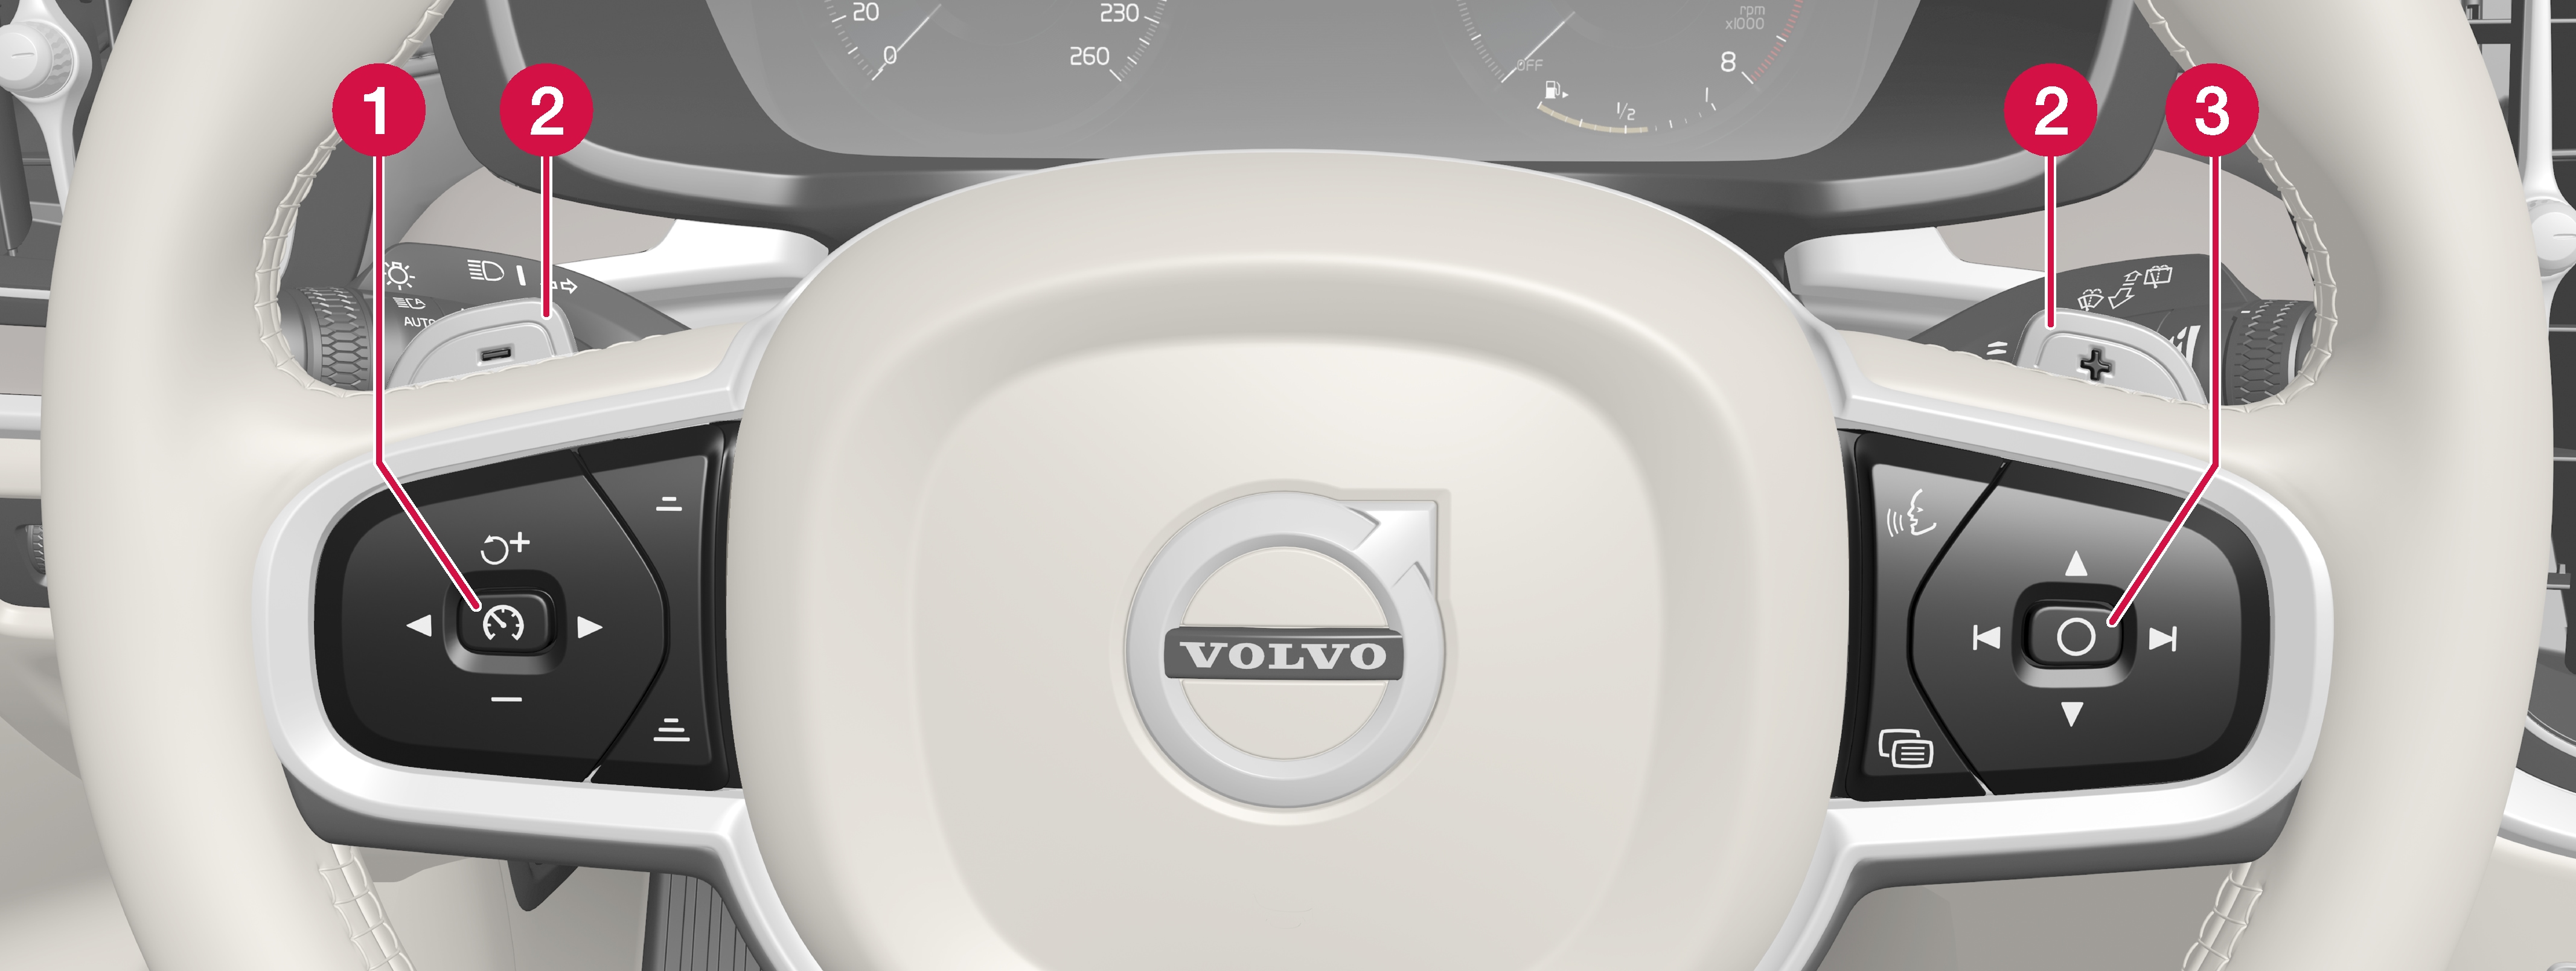 P5-1817-S60-V60-Steering wheel with numbers